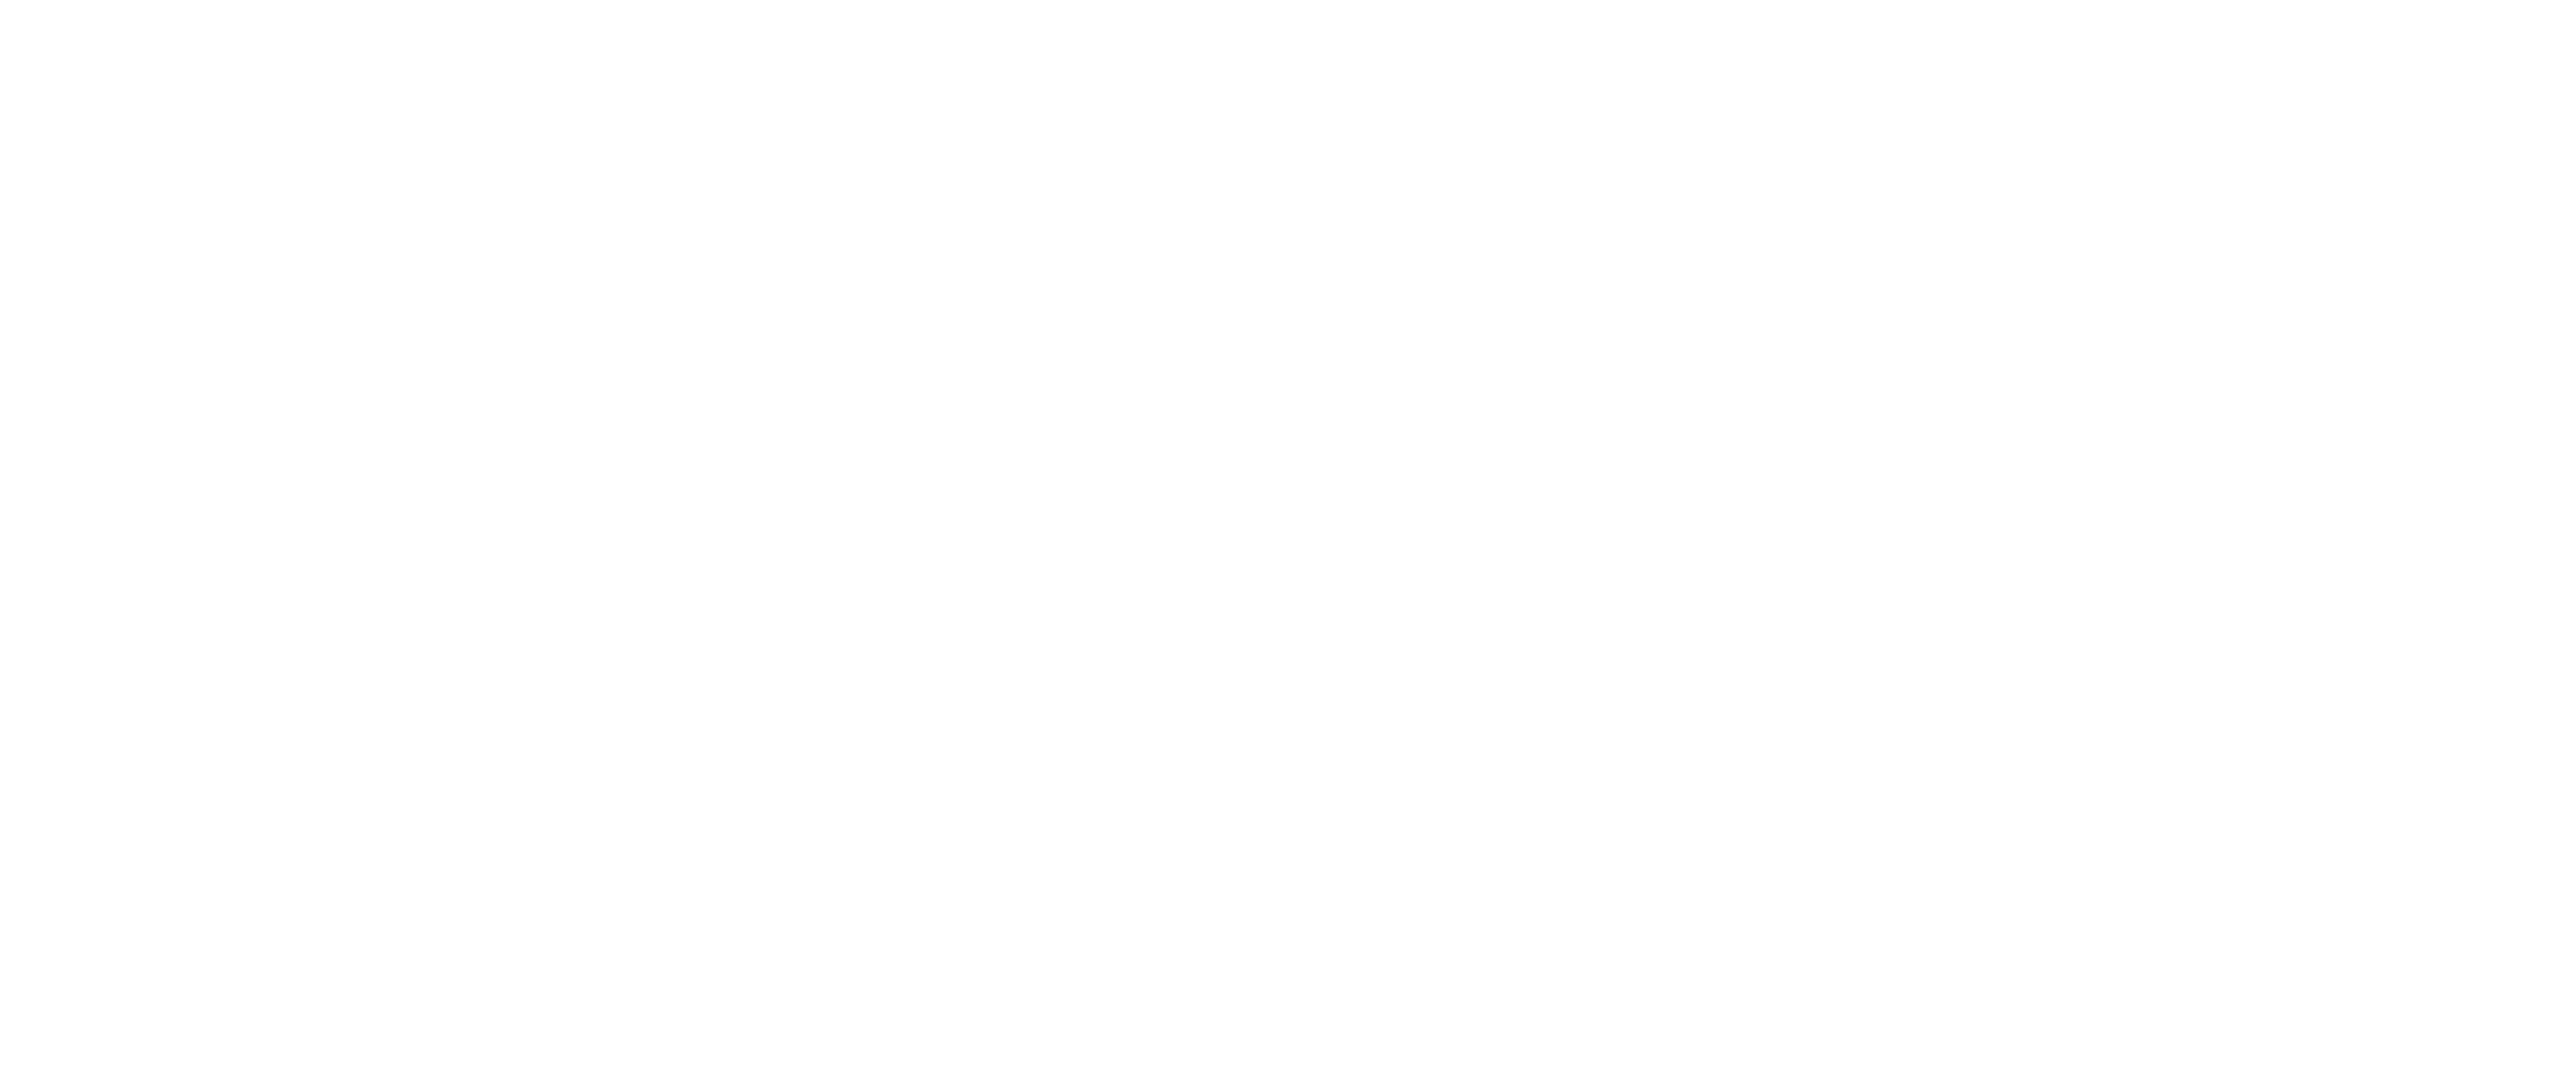 Just Content